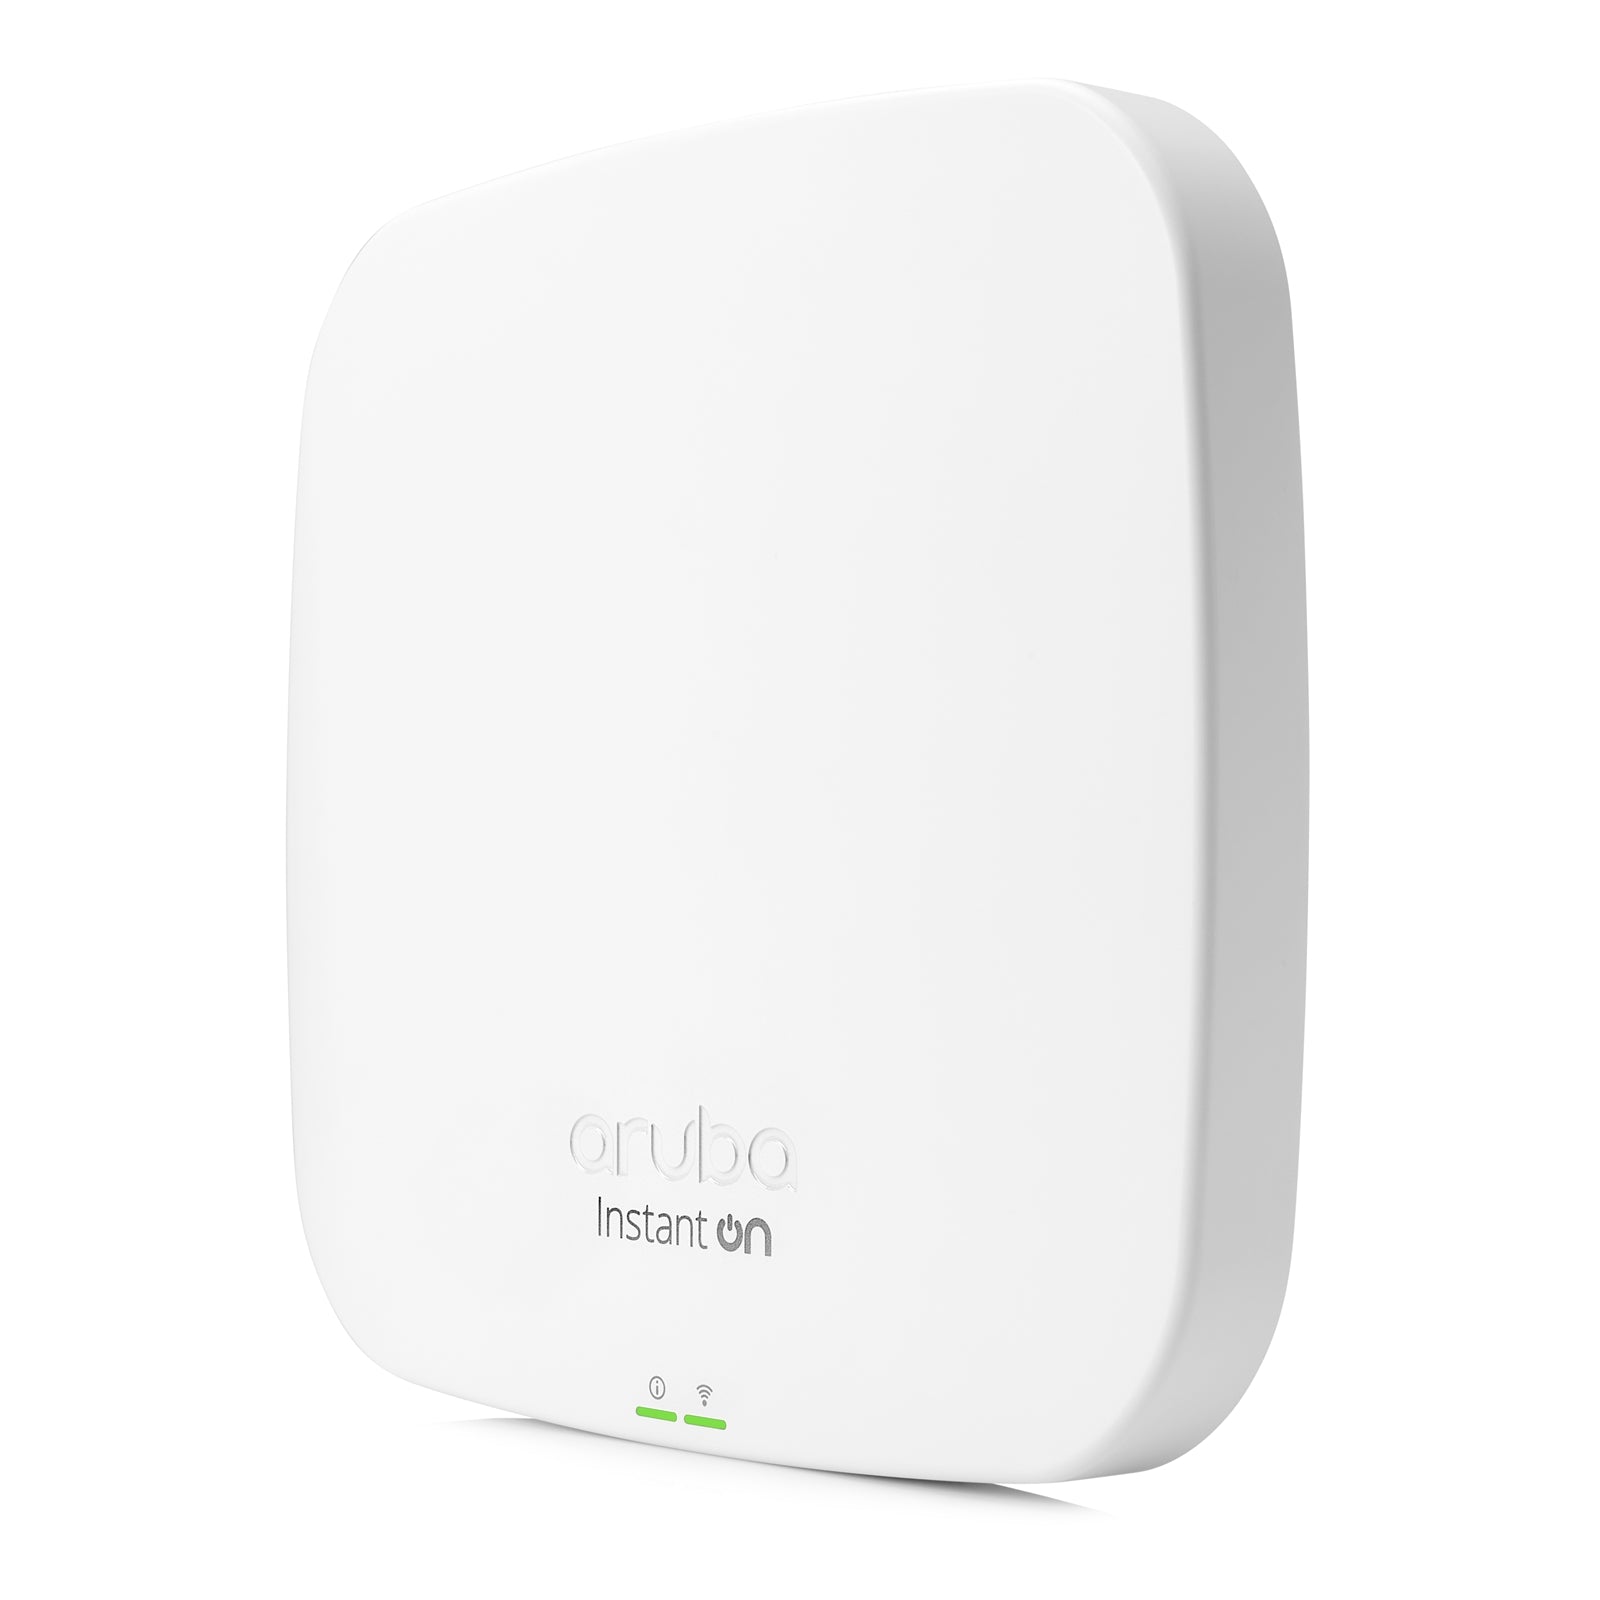 Aruba Instant On AP15 (RW) 4x4 11ac Wave2 Indoor Access Point, Smart Mesh Technology, MU-MIMO Radios, Remote Management, Cloud Managed, POE Powered, No POE Injector (R2X06A)